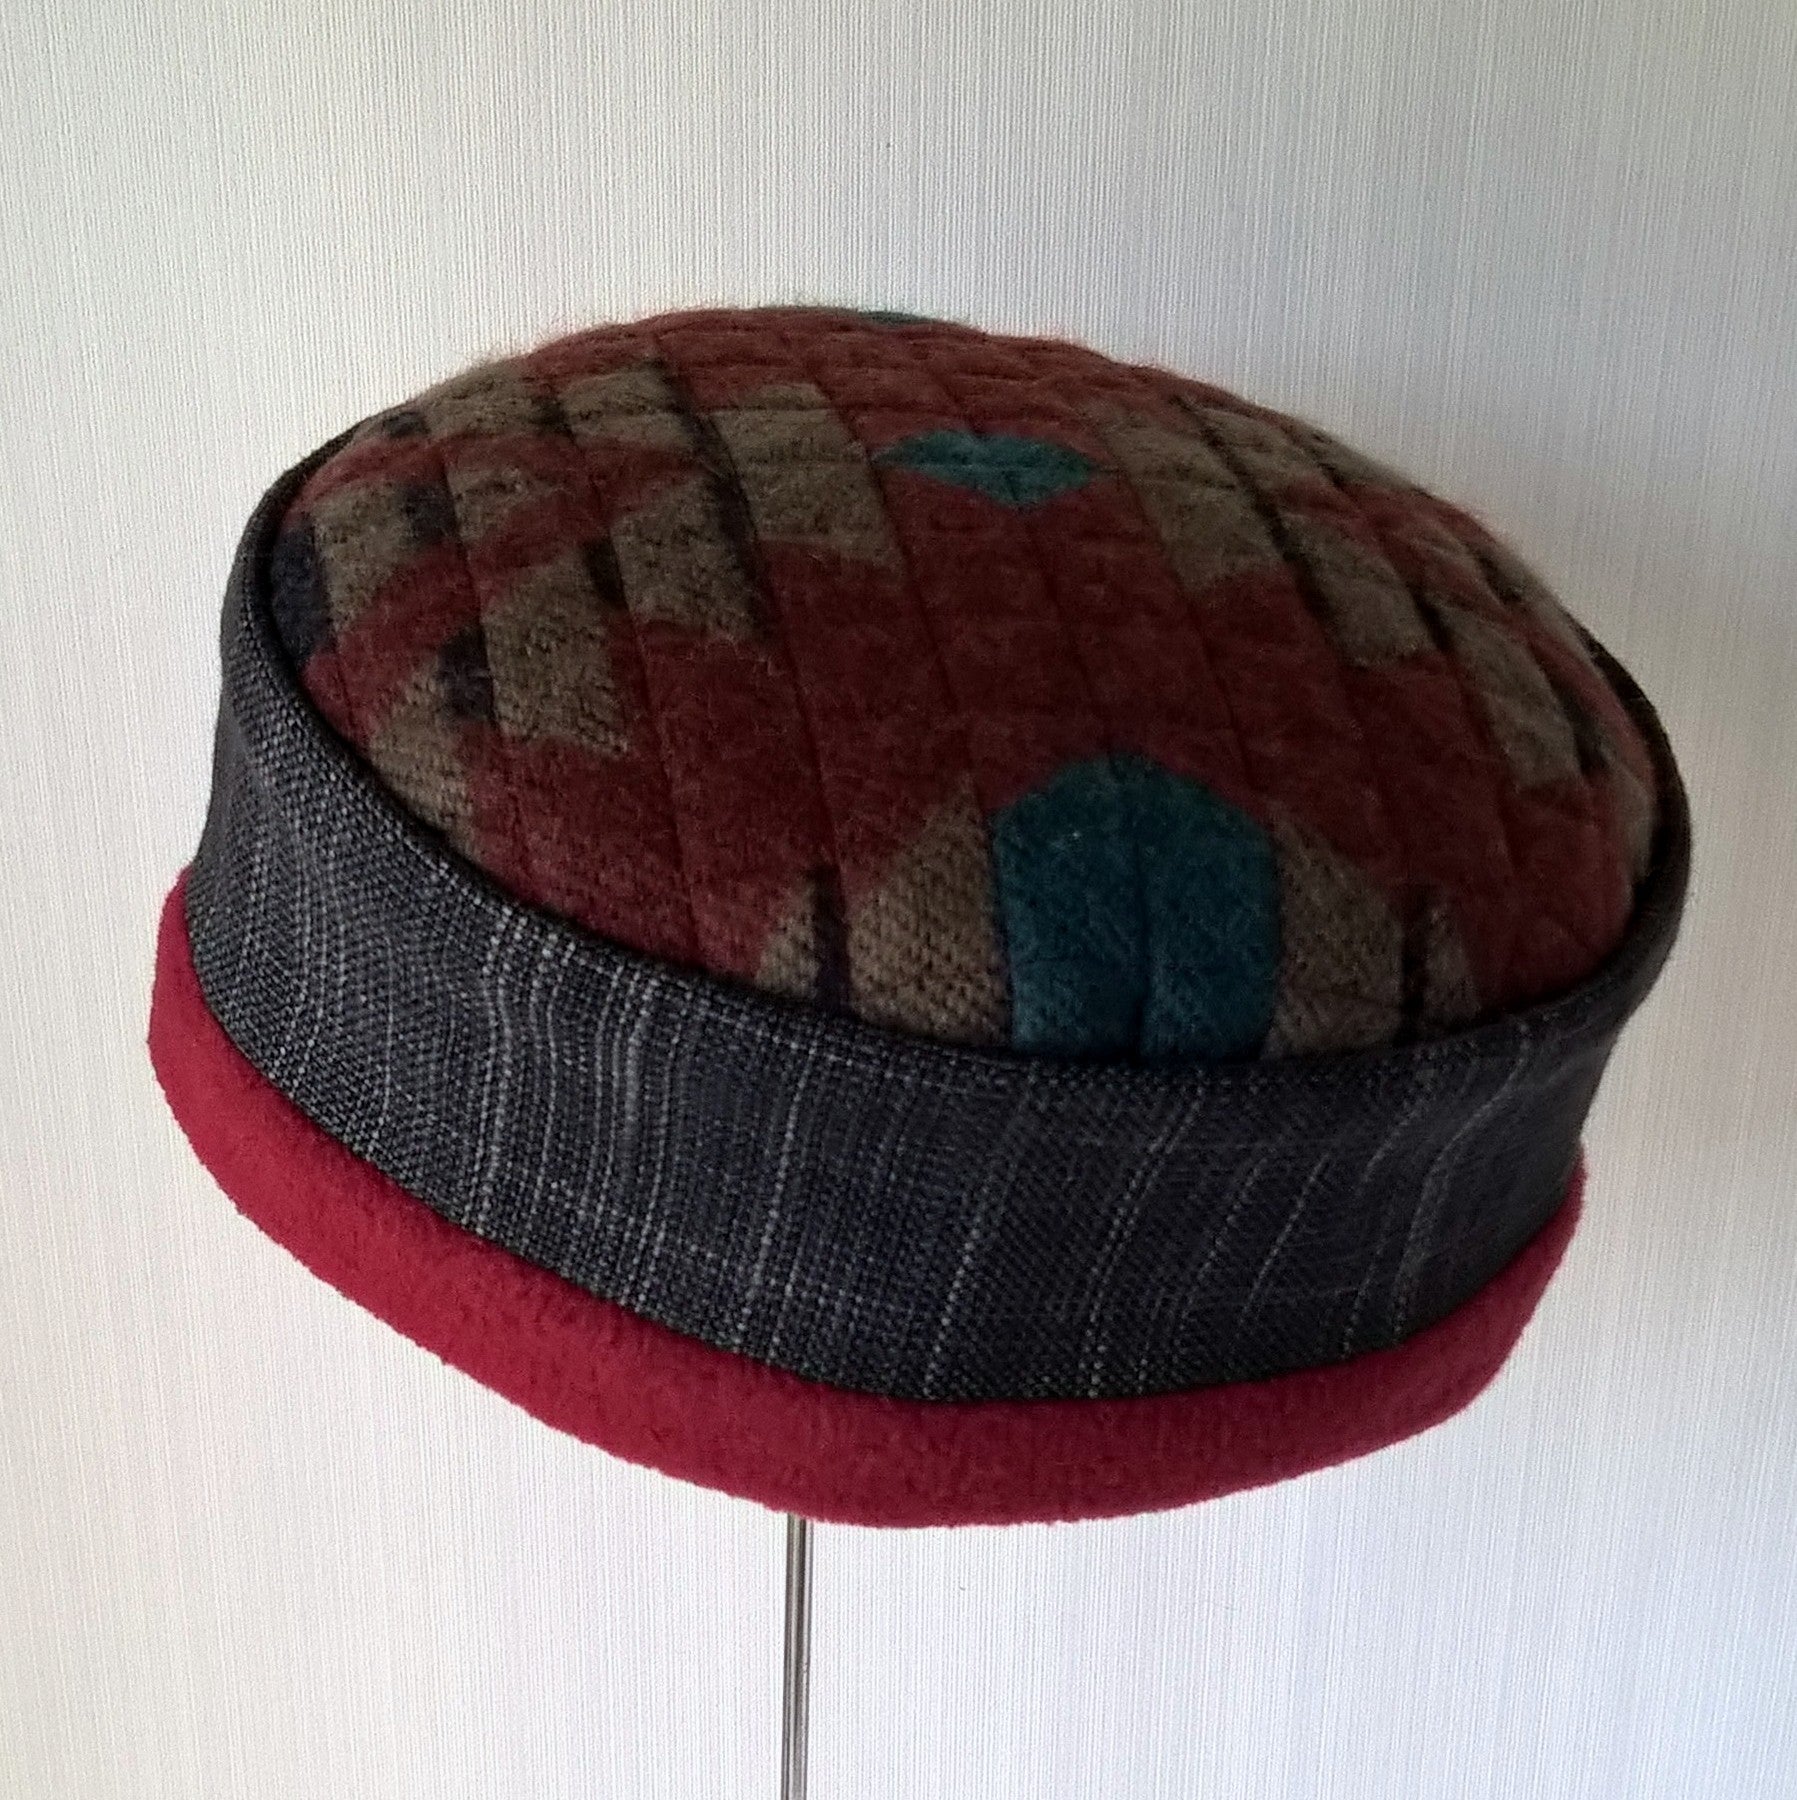 Fleece lined brimless cap withe Aztec patterned tip